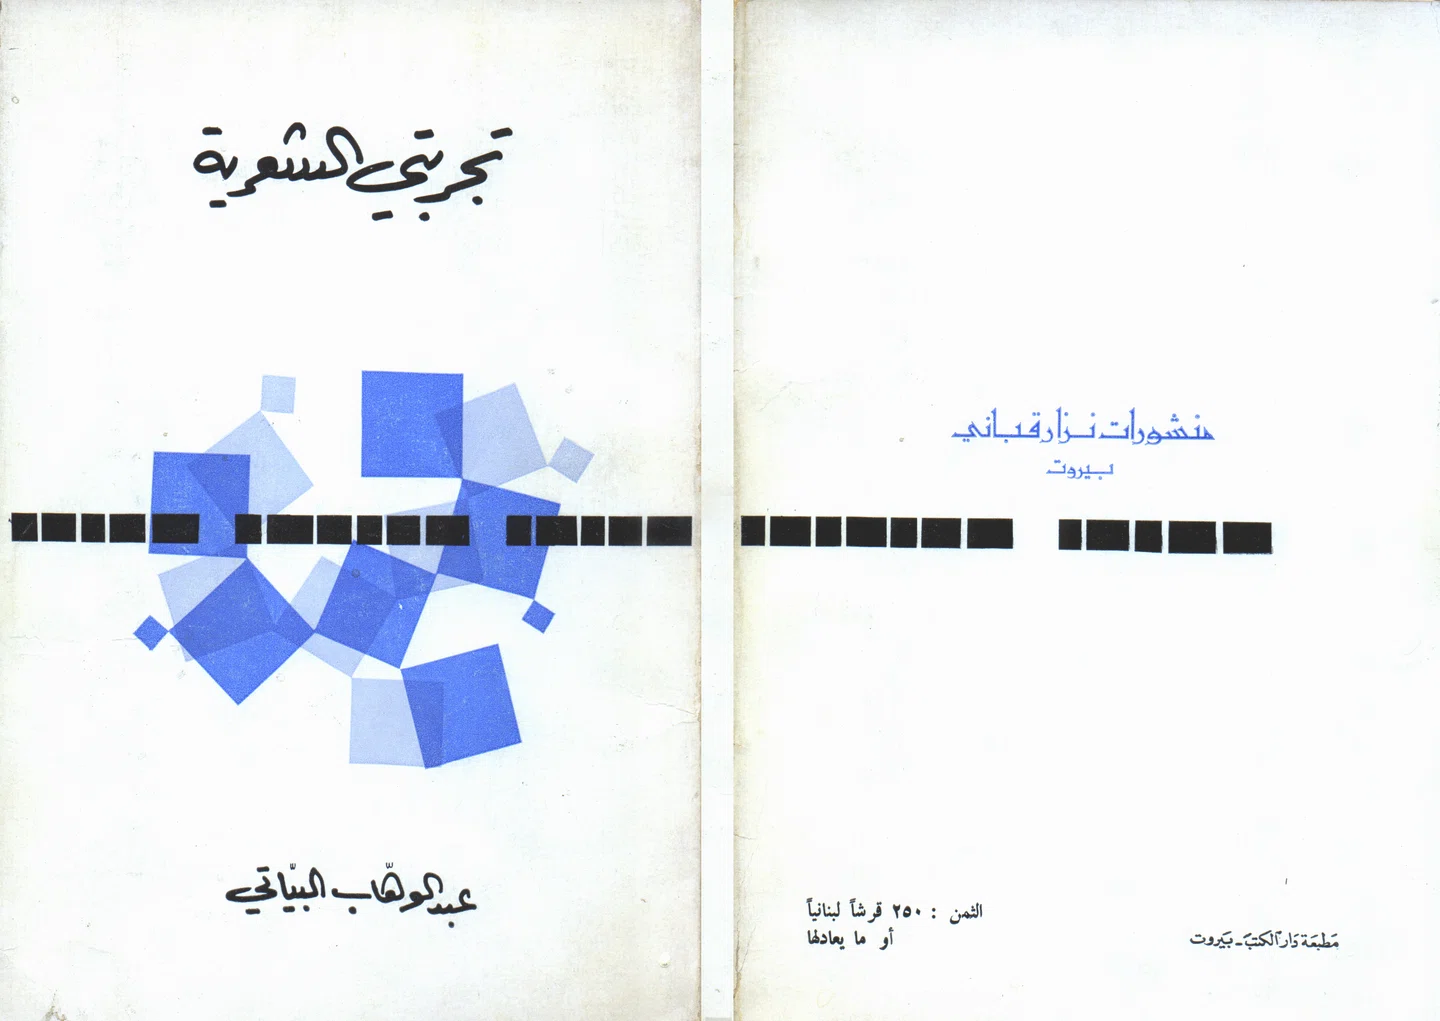 syrian-print-archive-features-graphic-design-itsnicethat-28.jpg